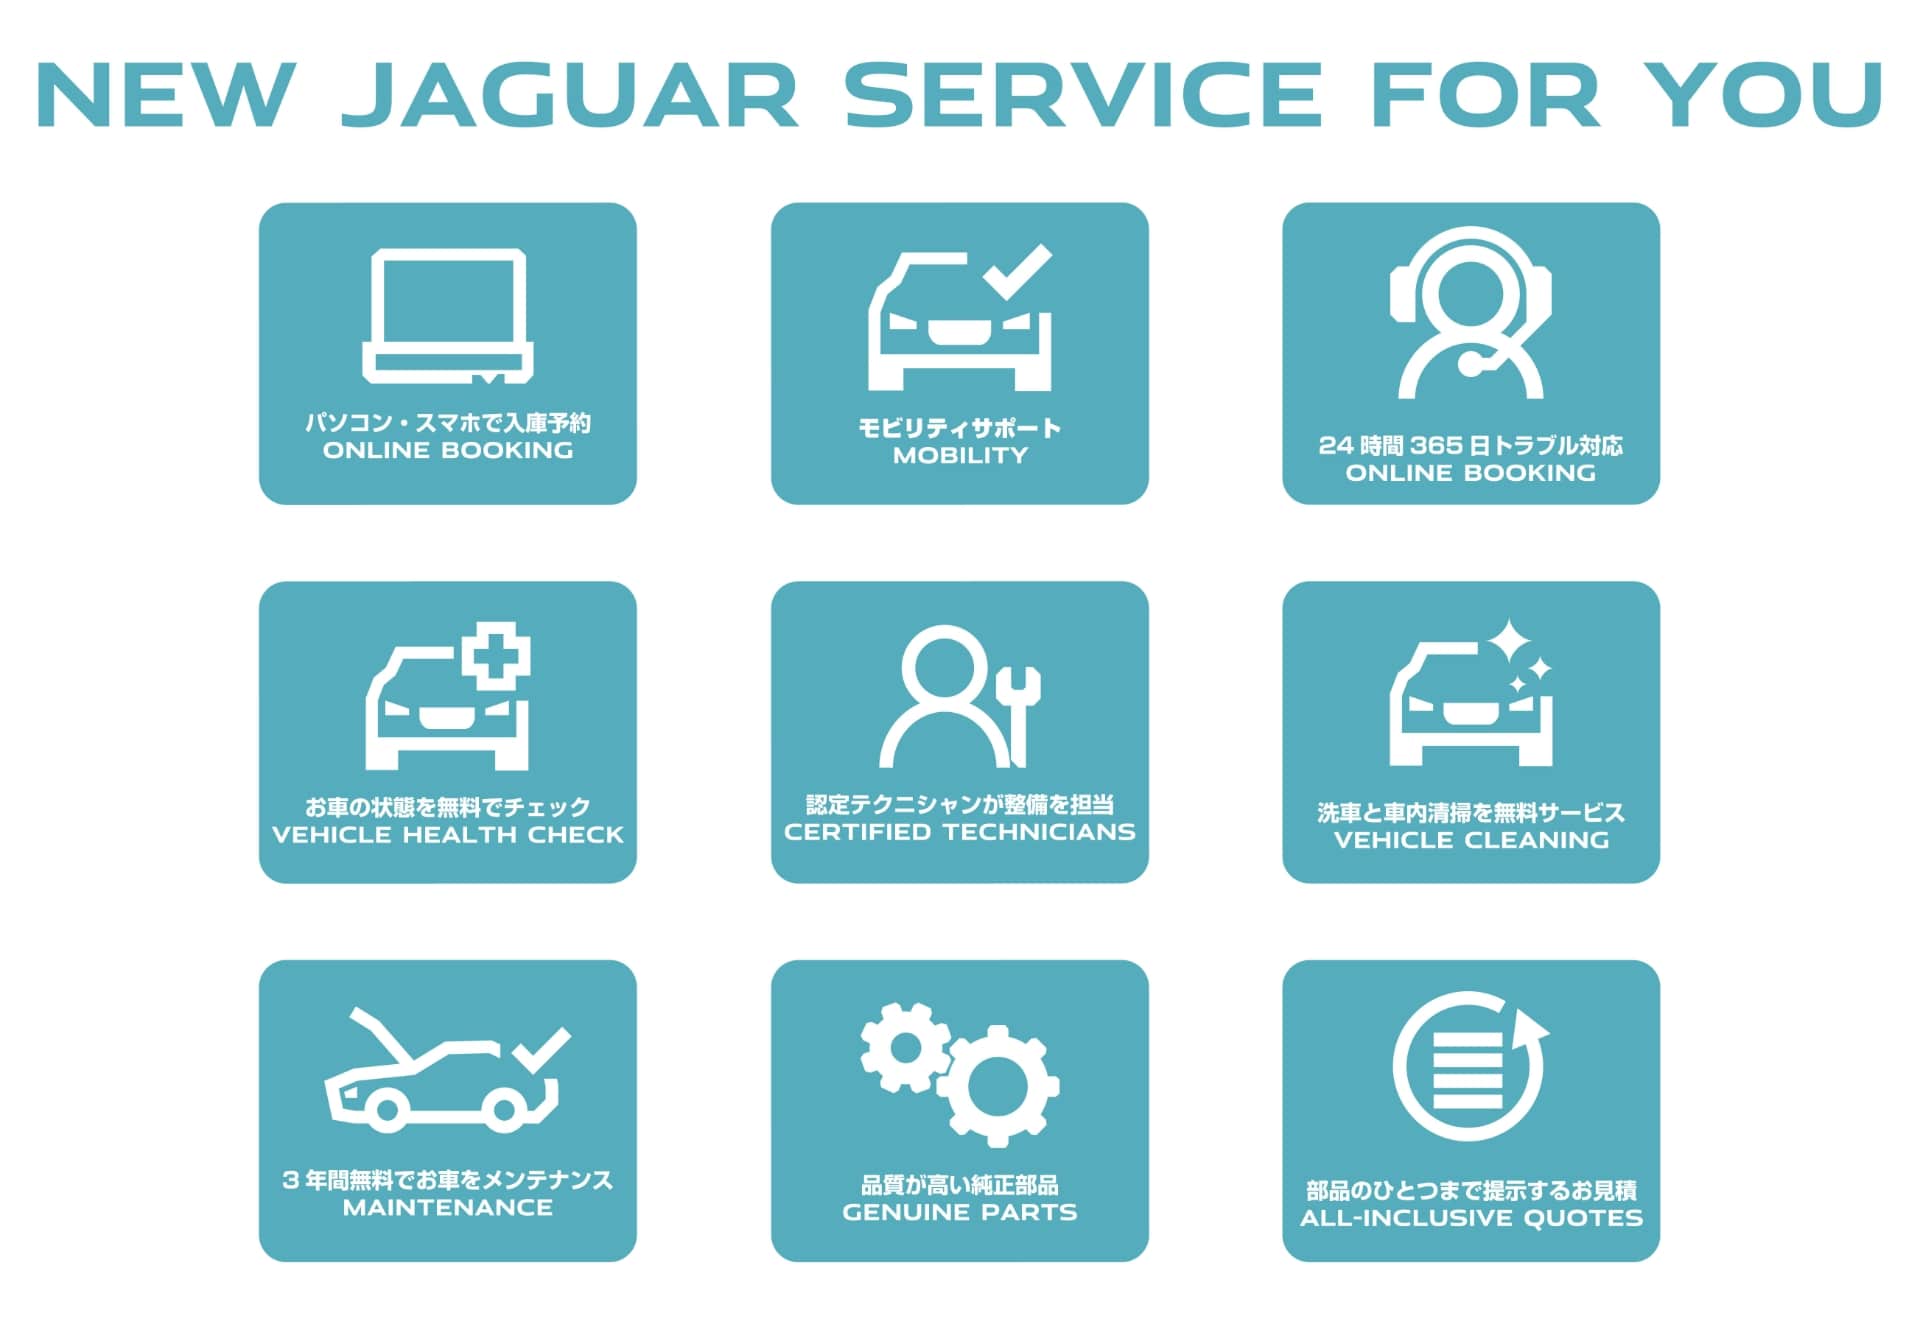 「NEW JAGUAR SERVICE FOR YOU」サービス一覧